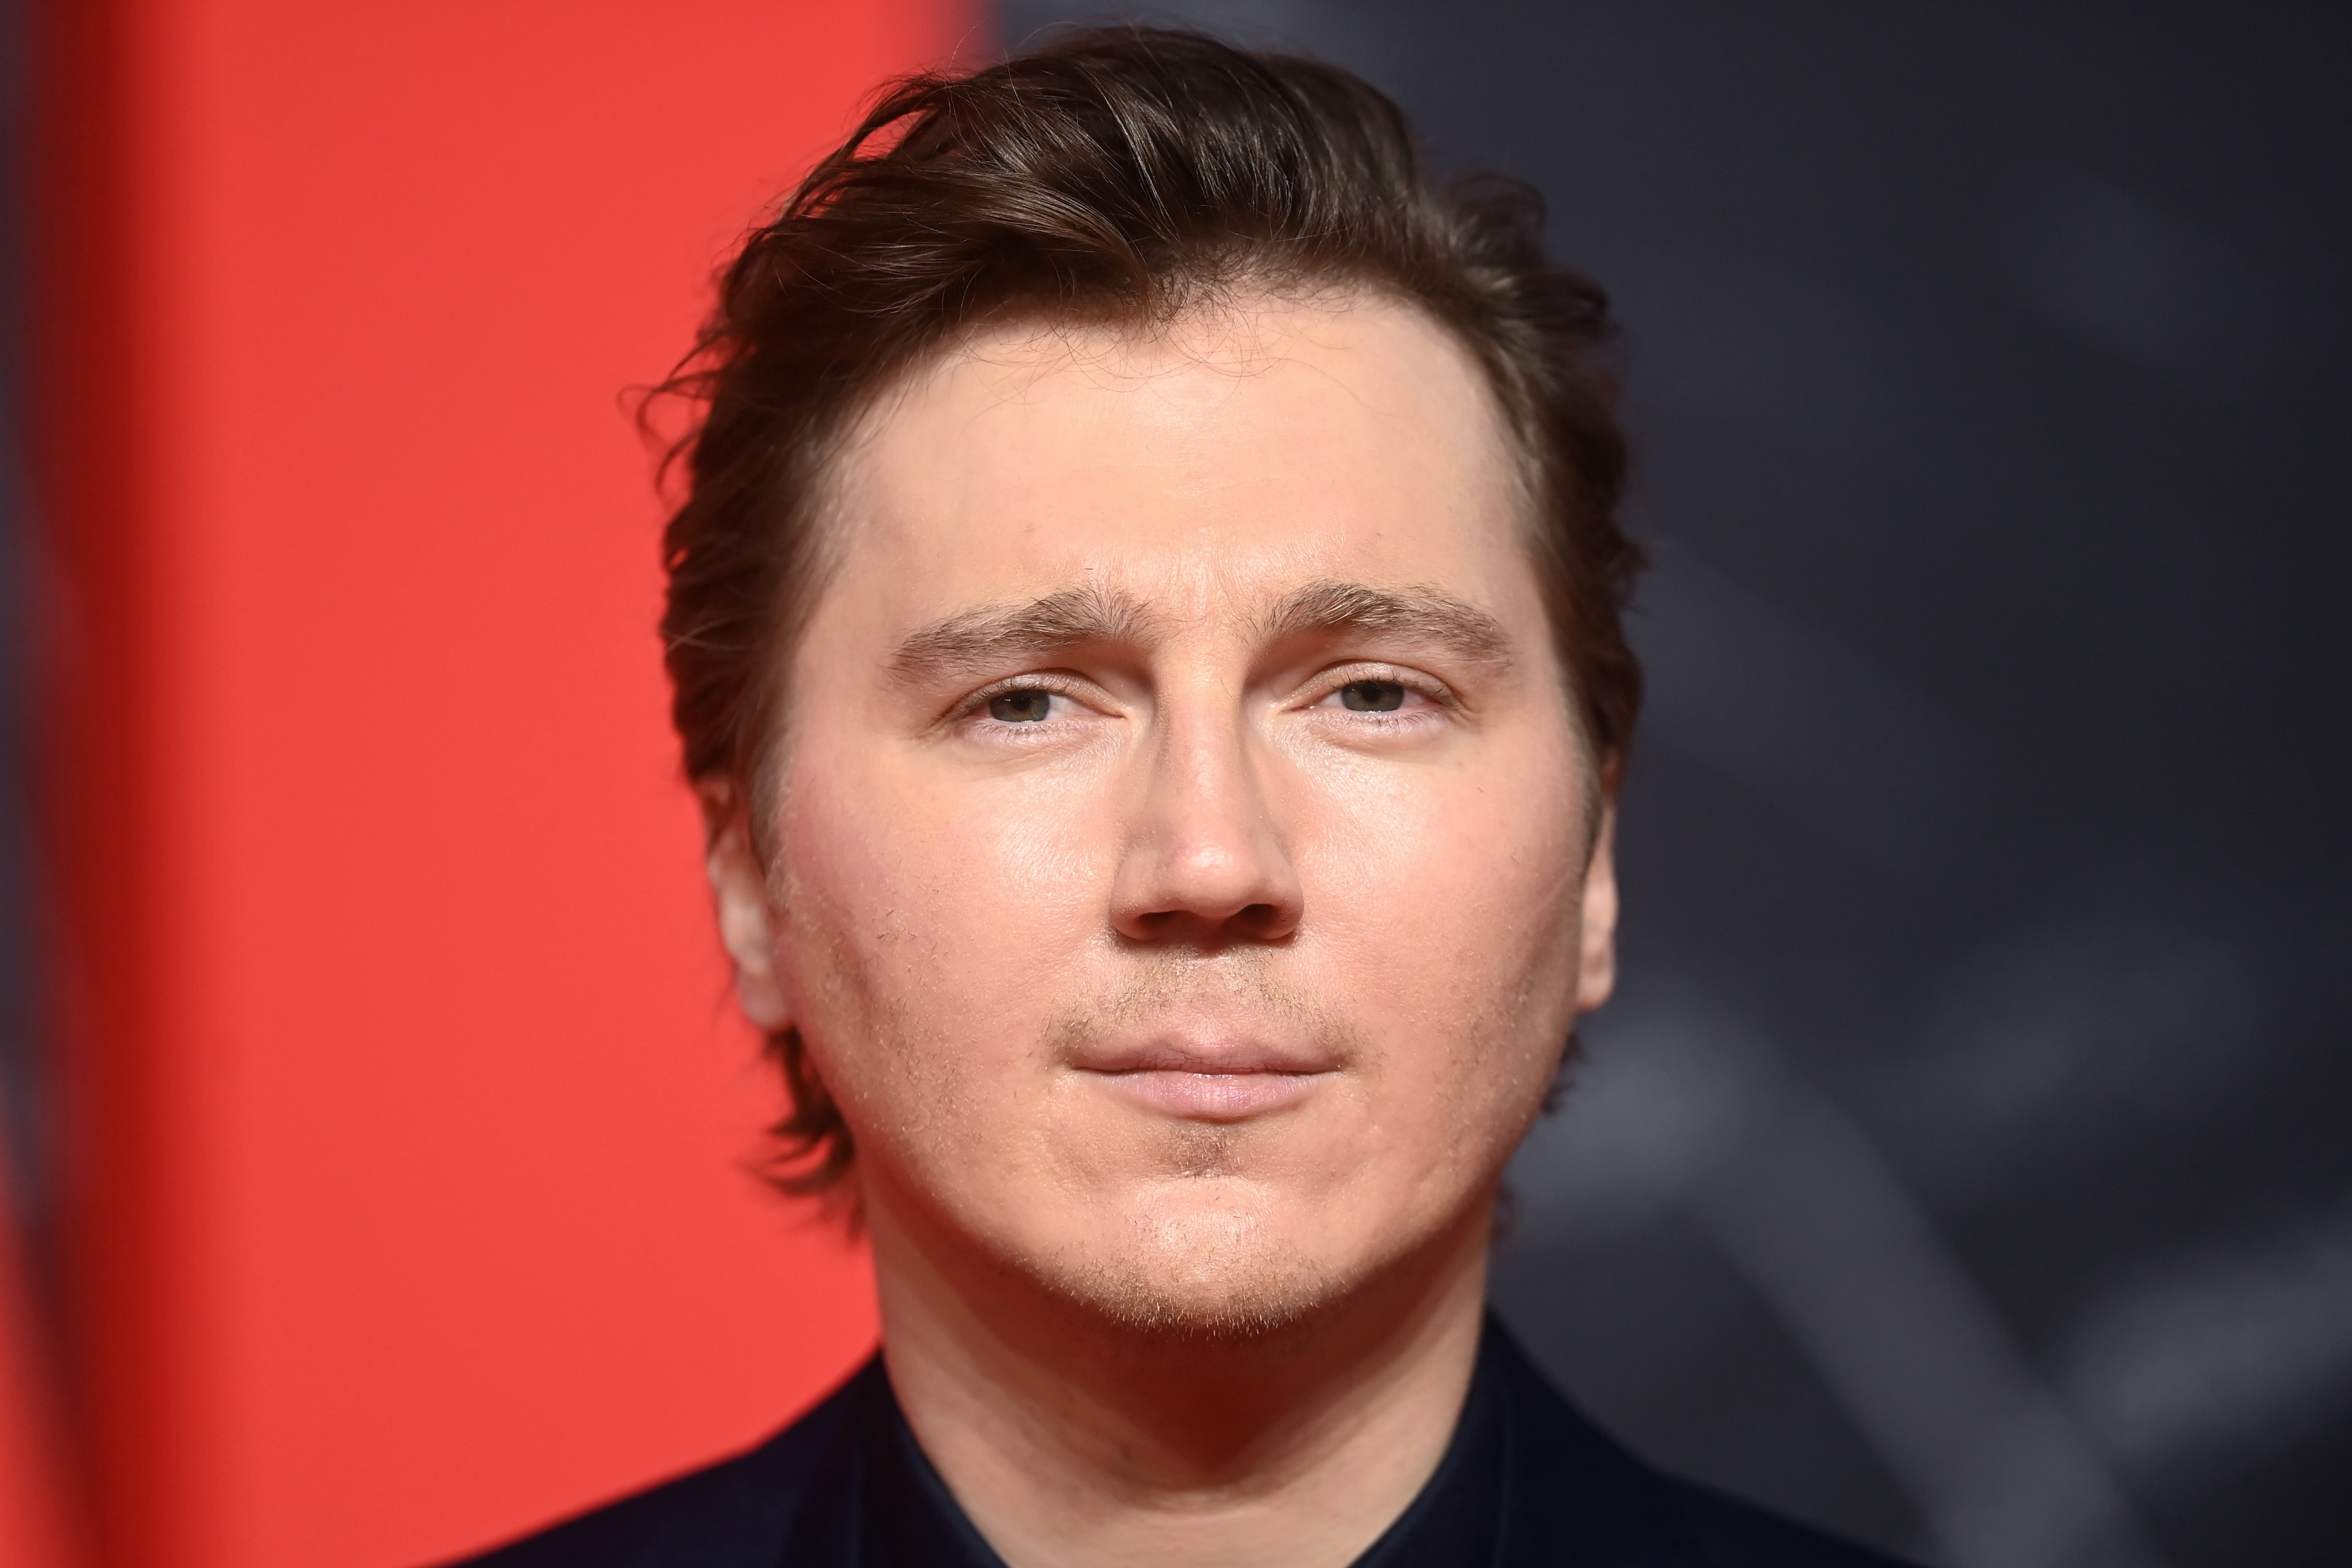 Paul Dano at a special February 23 screening of The Batman in London, England. (Photo: Dave J. Hogan, Getty Images)